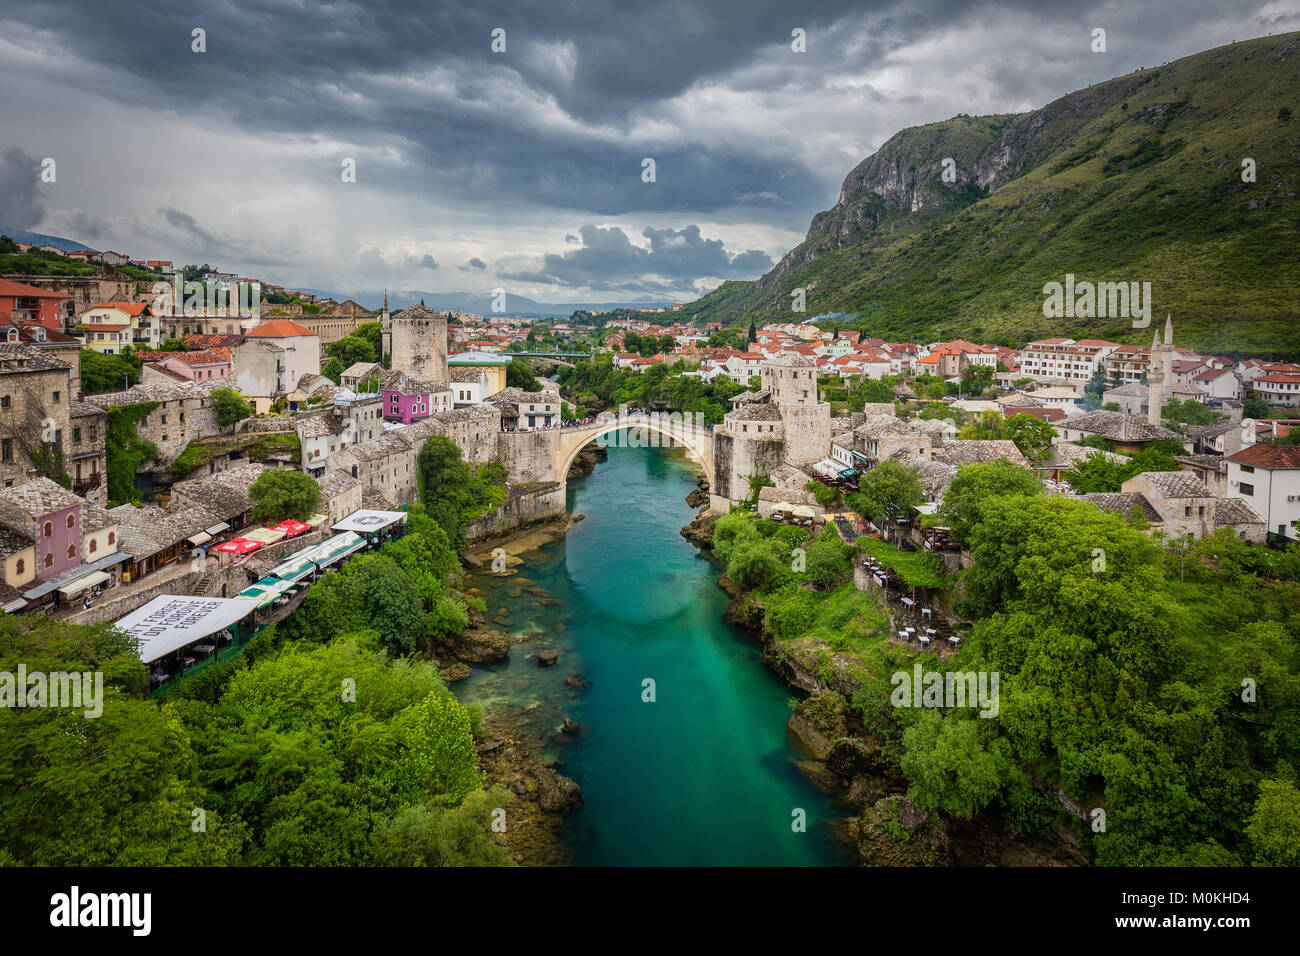 Aerial view of the historic town of Mostar with famous Old Bridge (Stari Most) on a rainy day with dark clouds in summer, Bosnia and Herzegowina Stock Photo